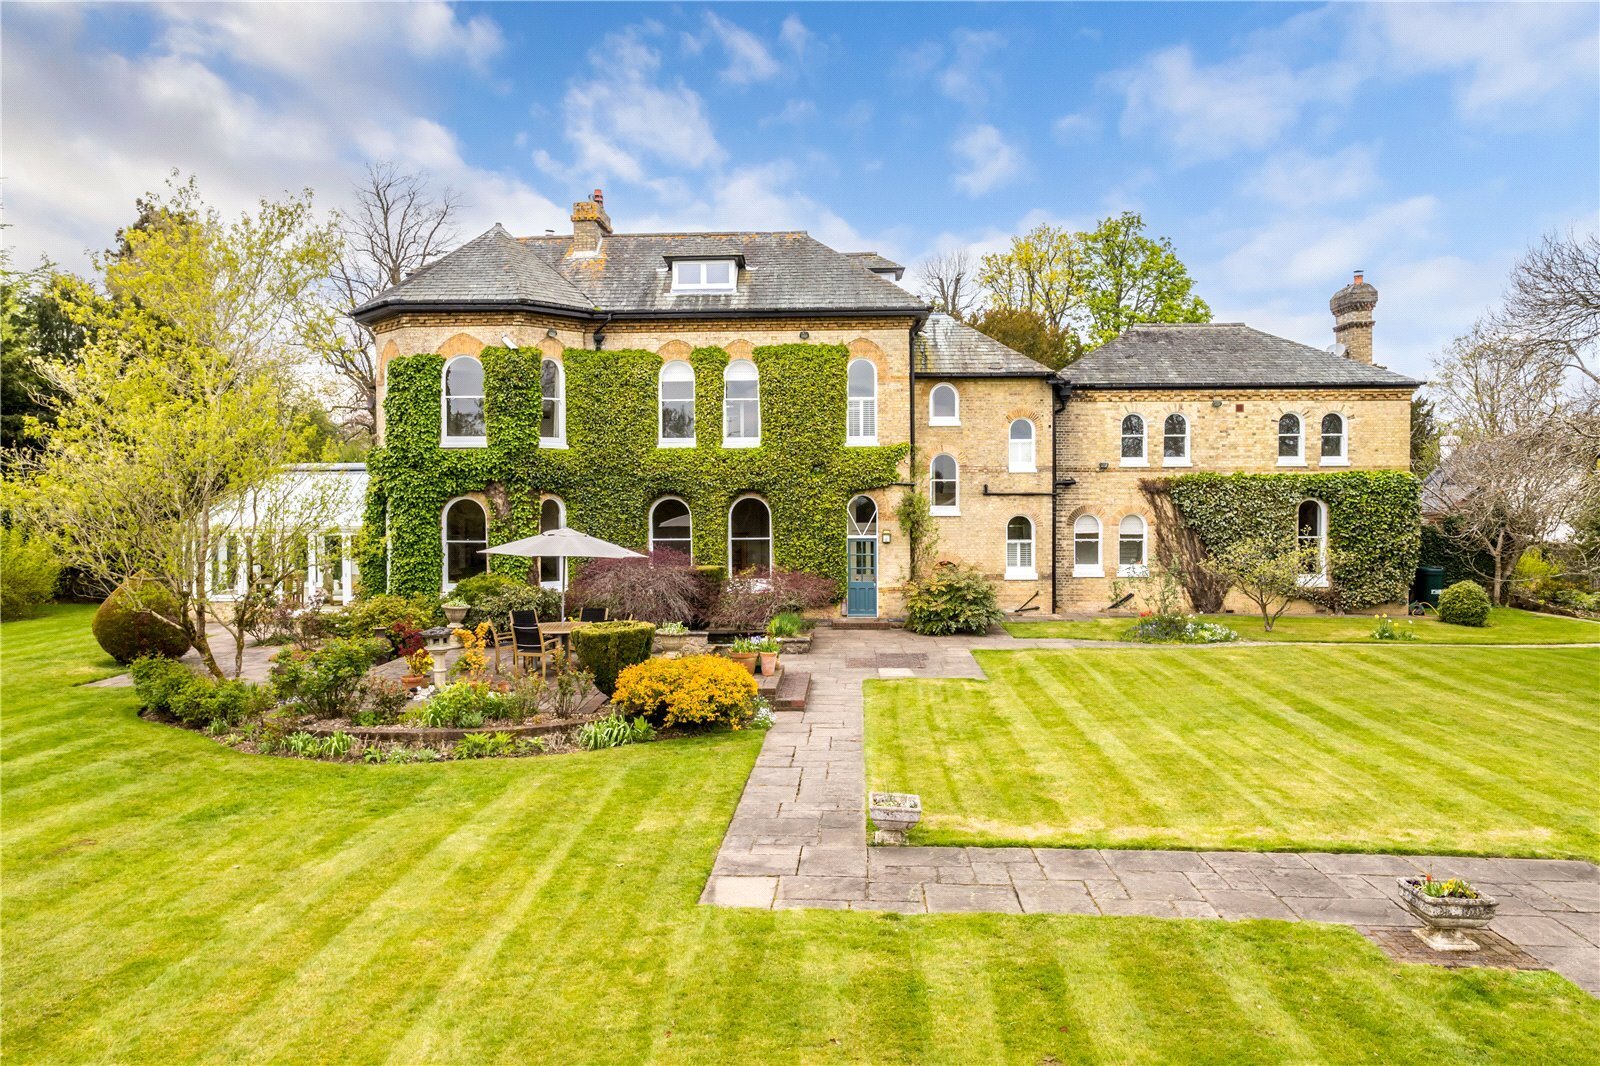 a-charming-house-in-two-acres,-with-pool-and-village-location-—-yet-just-17-miles-from-central-london